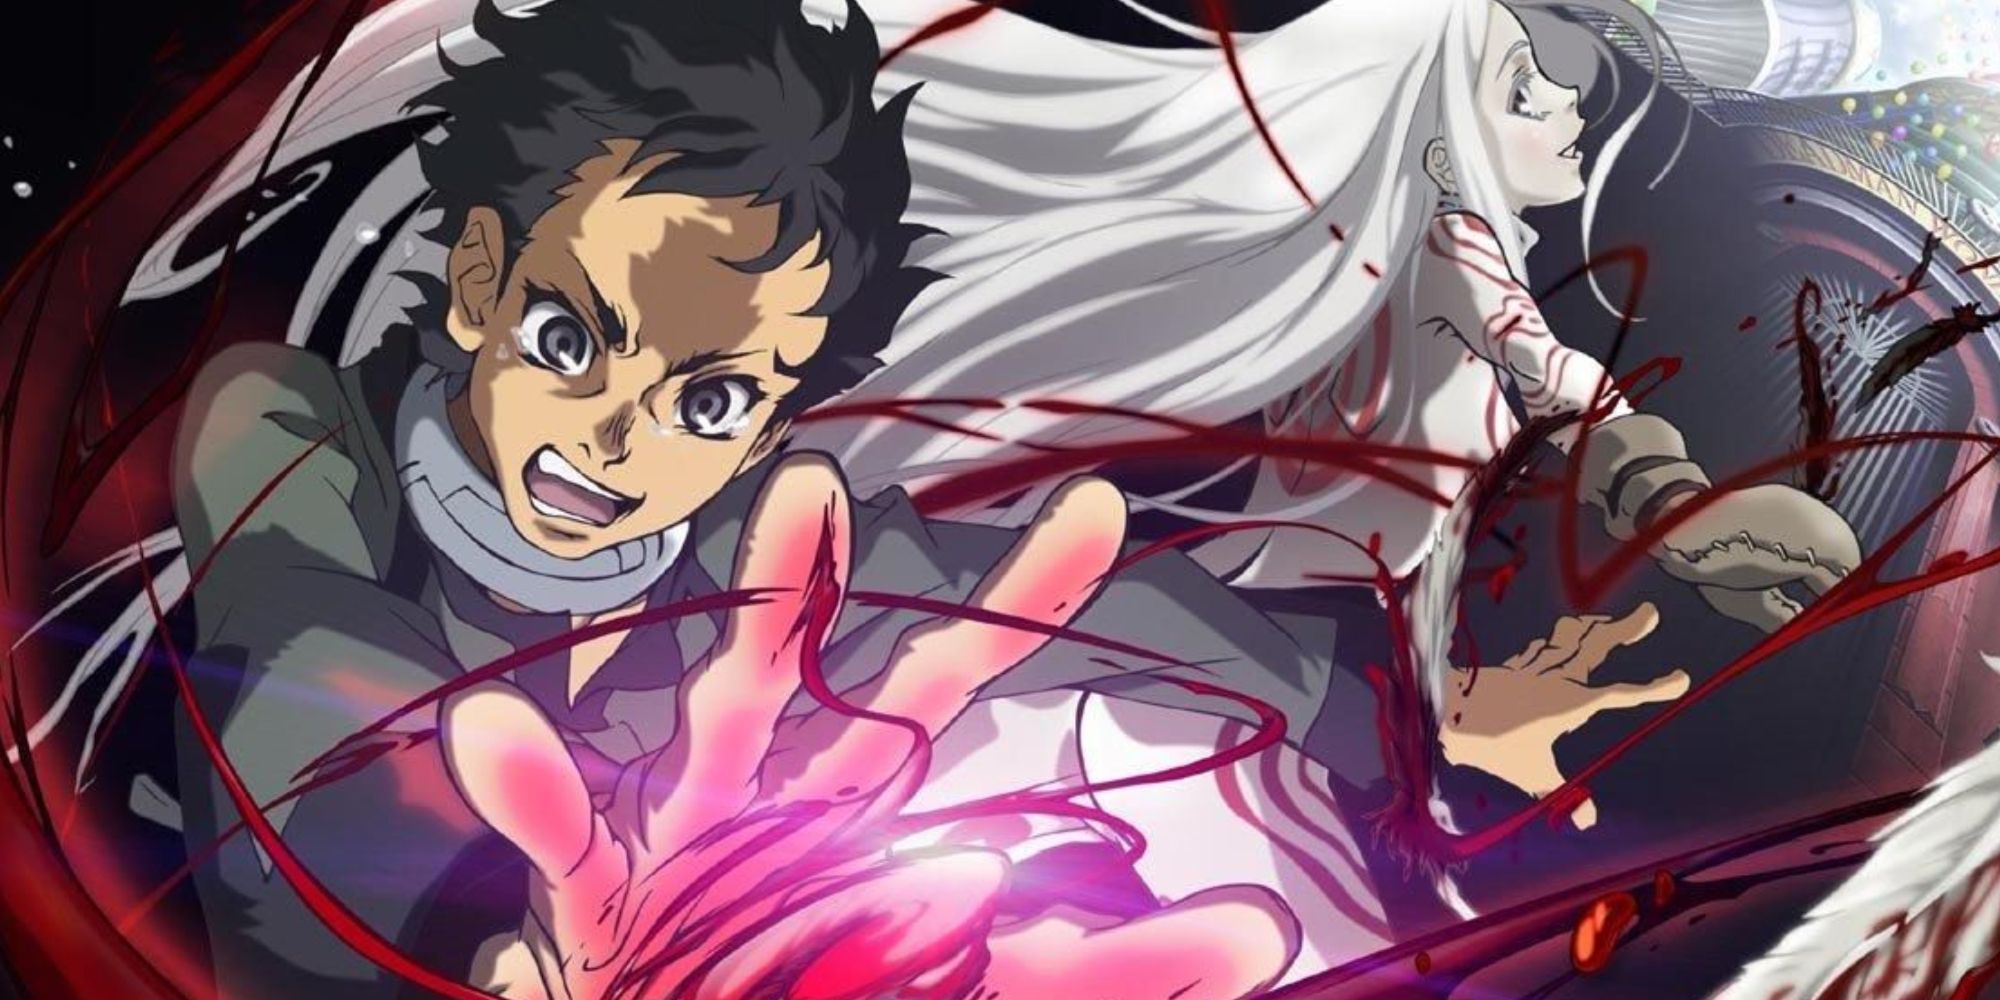 An image of two characters from Deadman Wonderland in action poses.